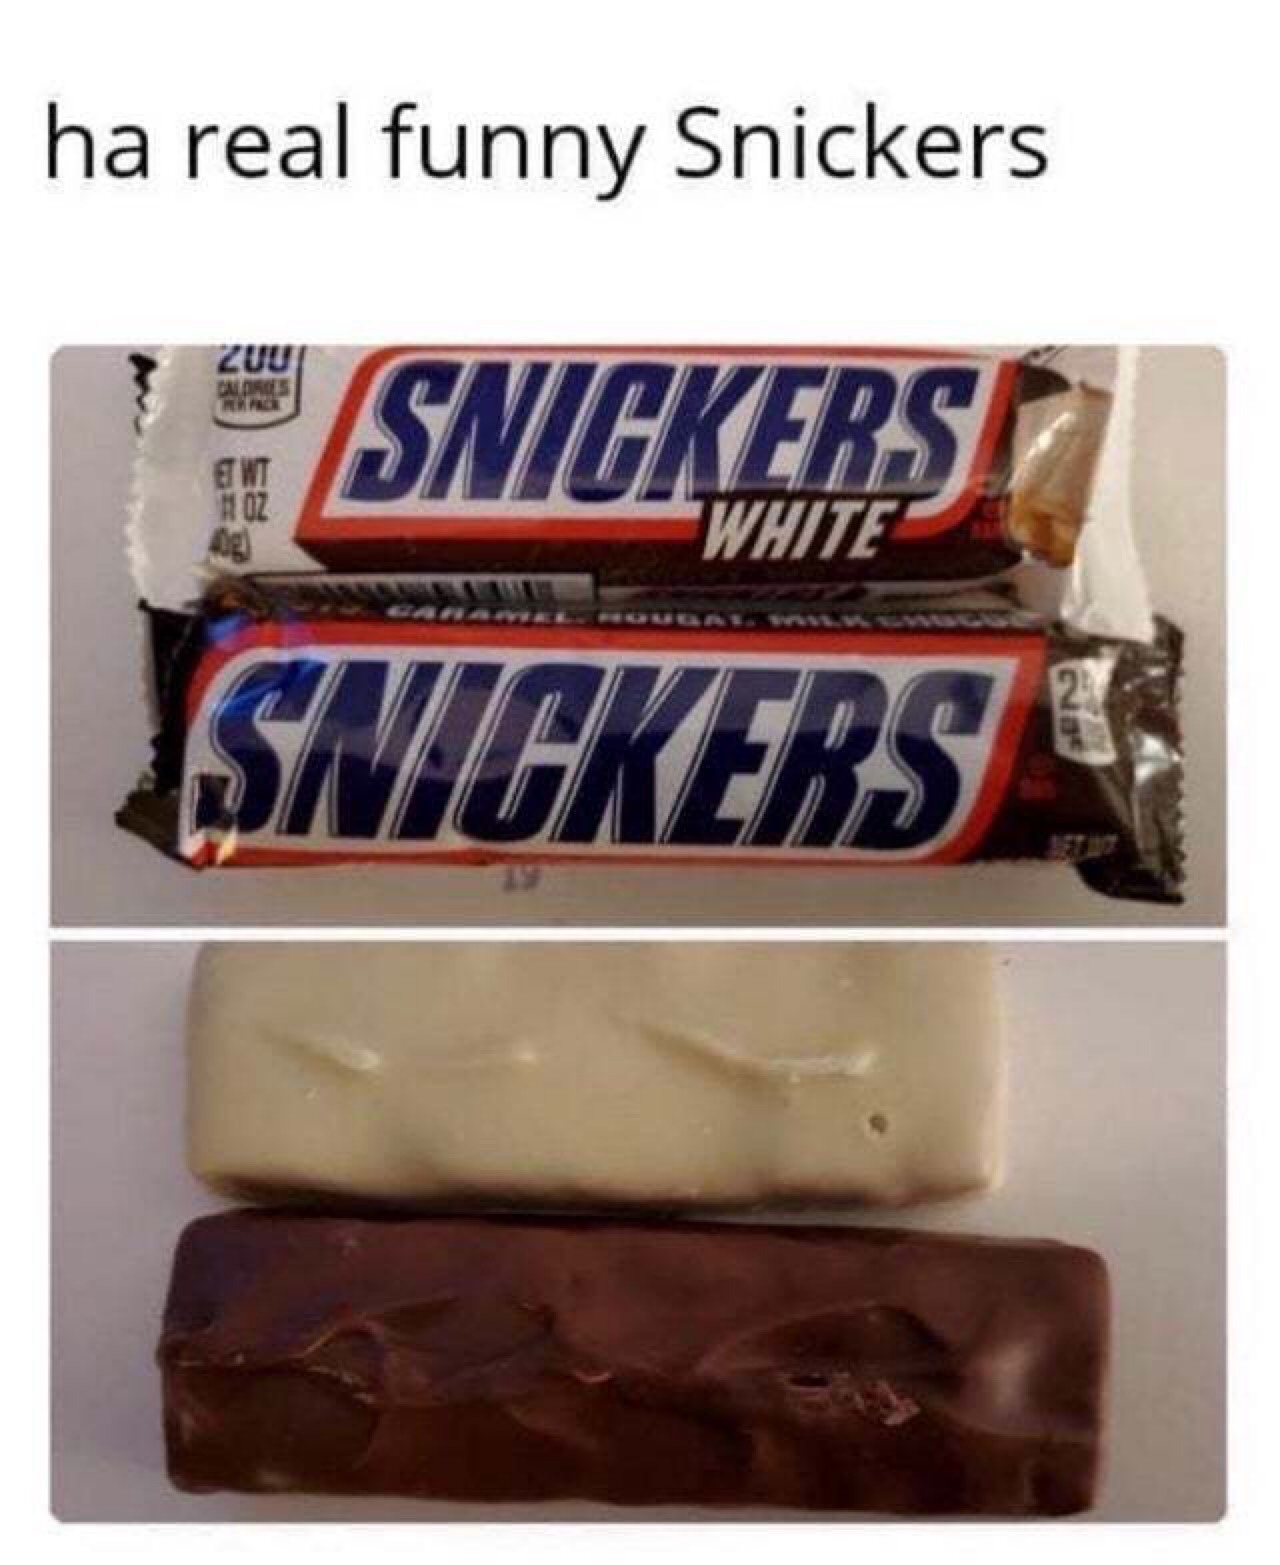 who even eats the white ones anyway - meme